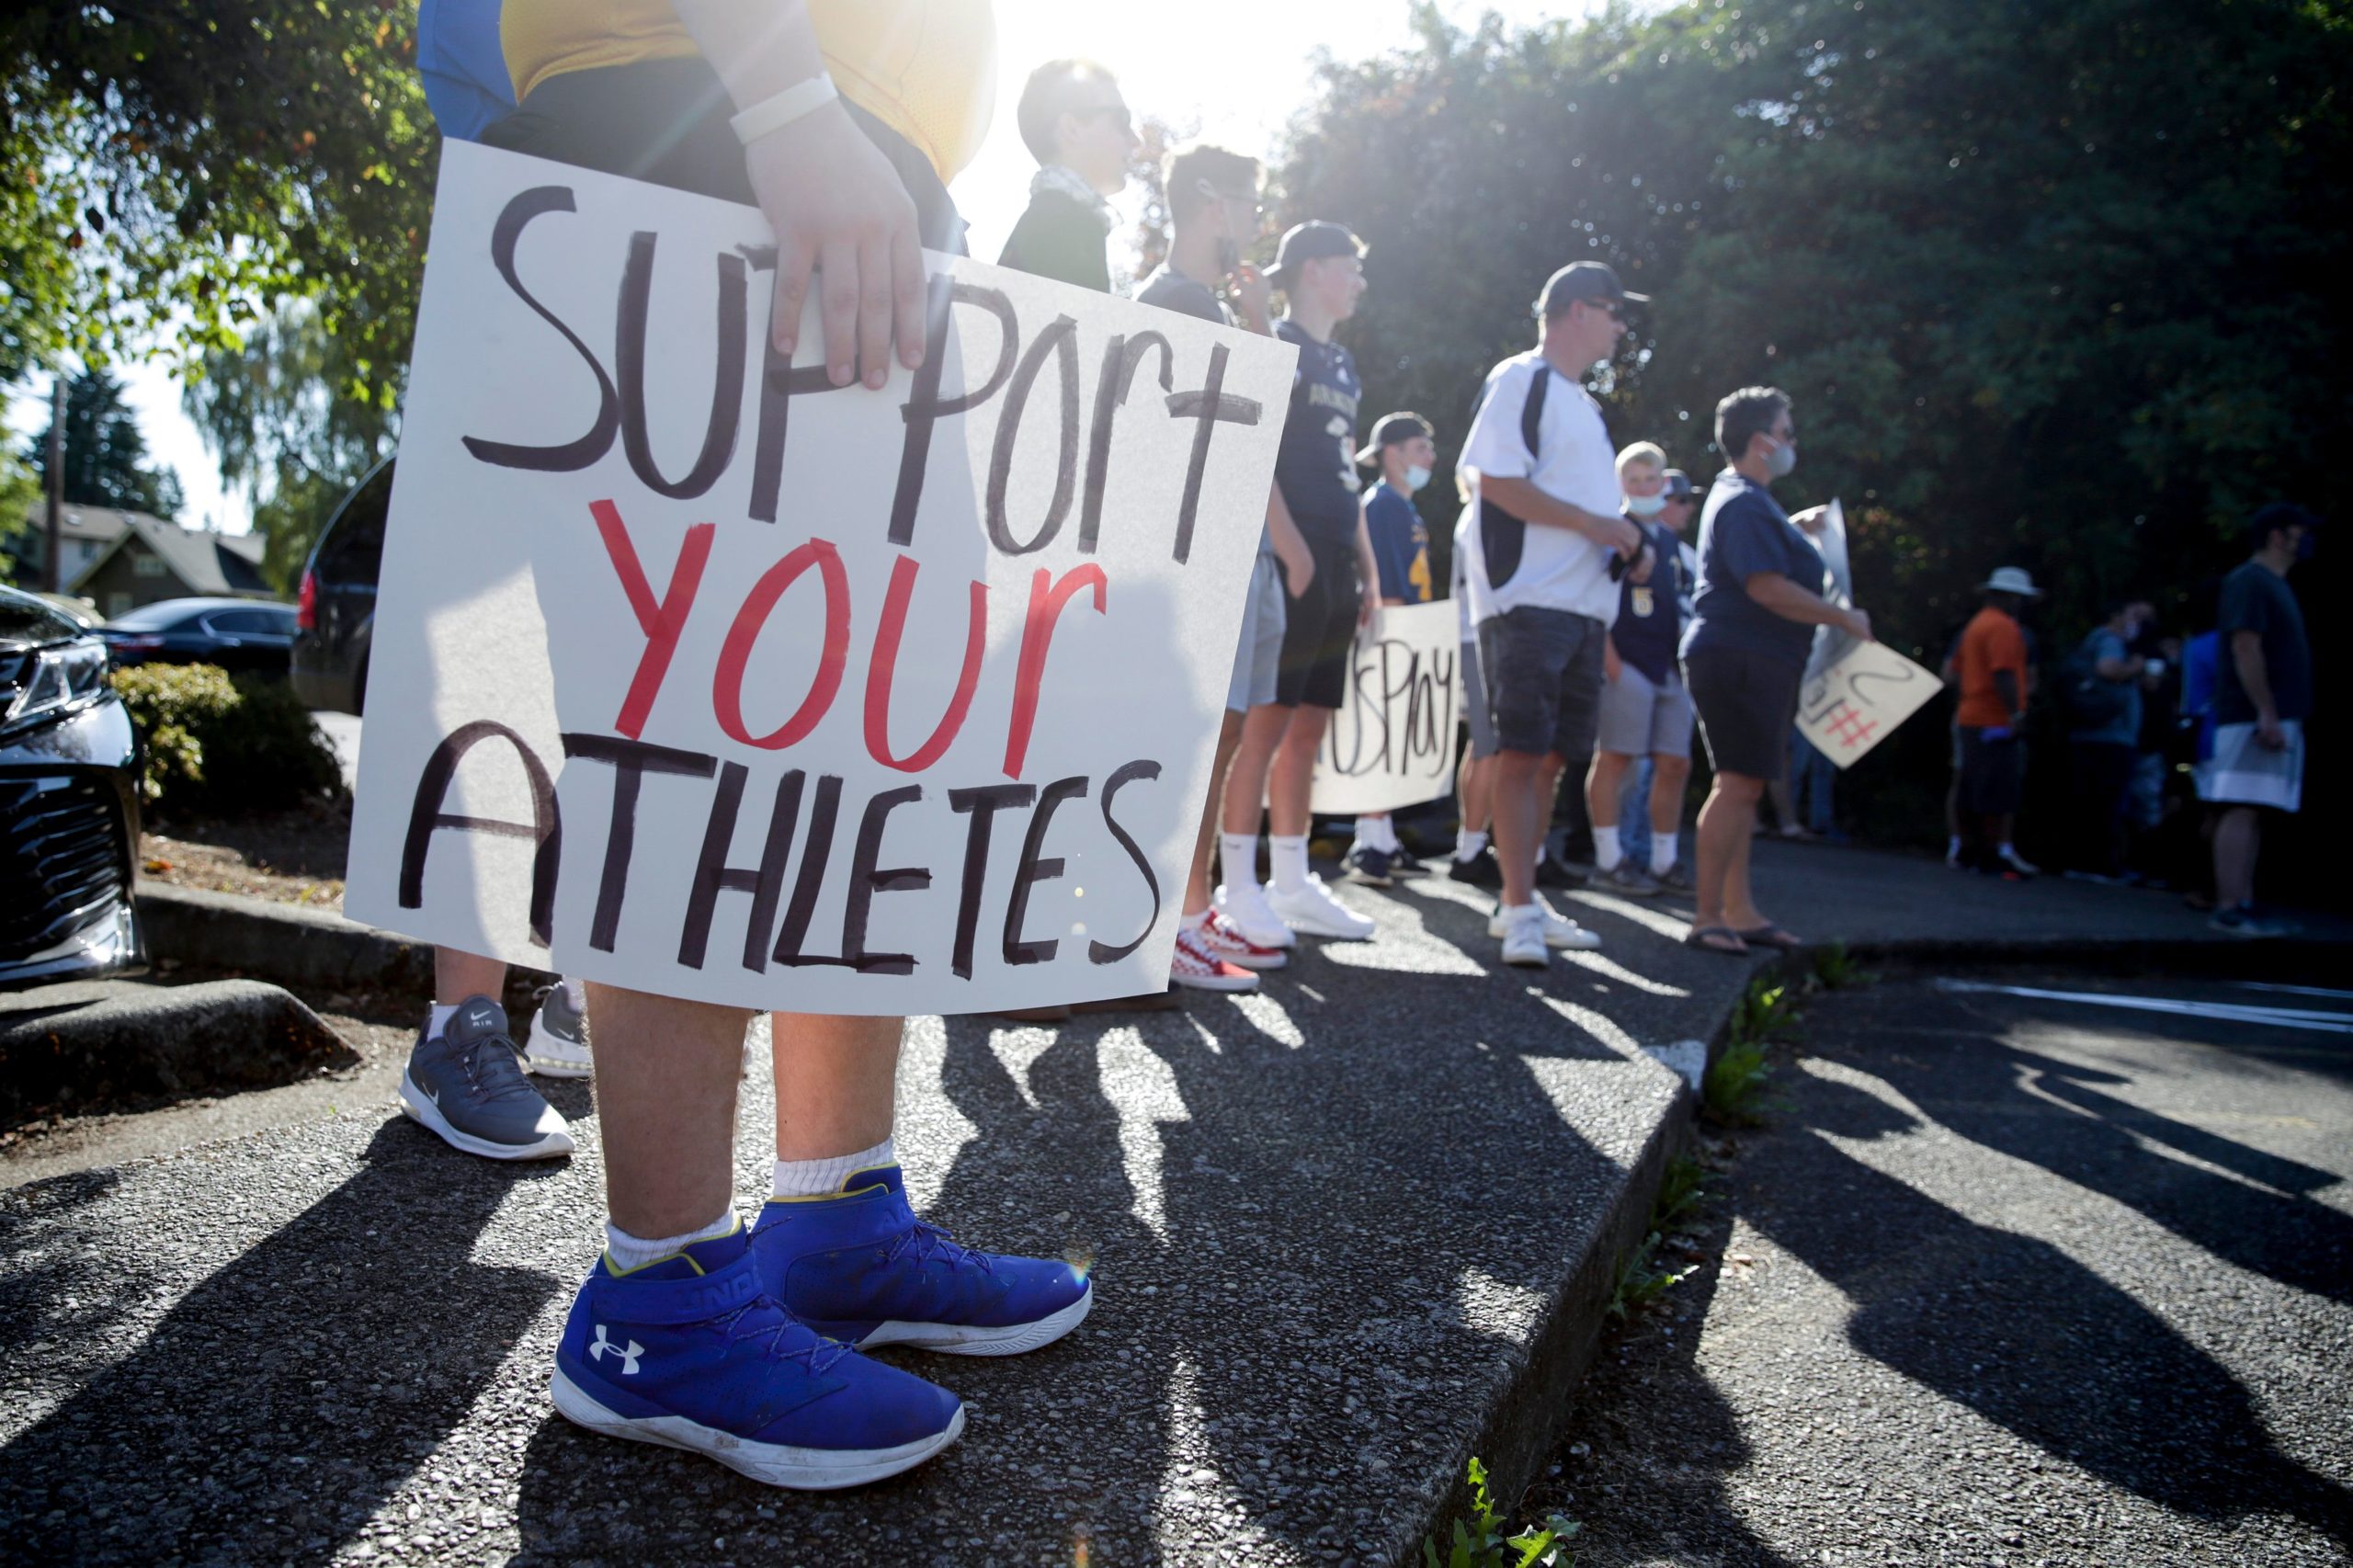 Athlete Zackery Schmeichel of Hazen High School holds a sign that reads "support your athletes" as people gather for a march and rally organized by Student Athletes of Washington (SAW), a group that formed to protest the postponement of fall sports due to COVID-19, at the state capitol in Olympia, Washington on September 3, 2020. (Photo by Jason Redmond / AFP) (Photo by JASON REDMOND/AFP via Getty Images)